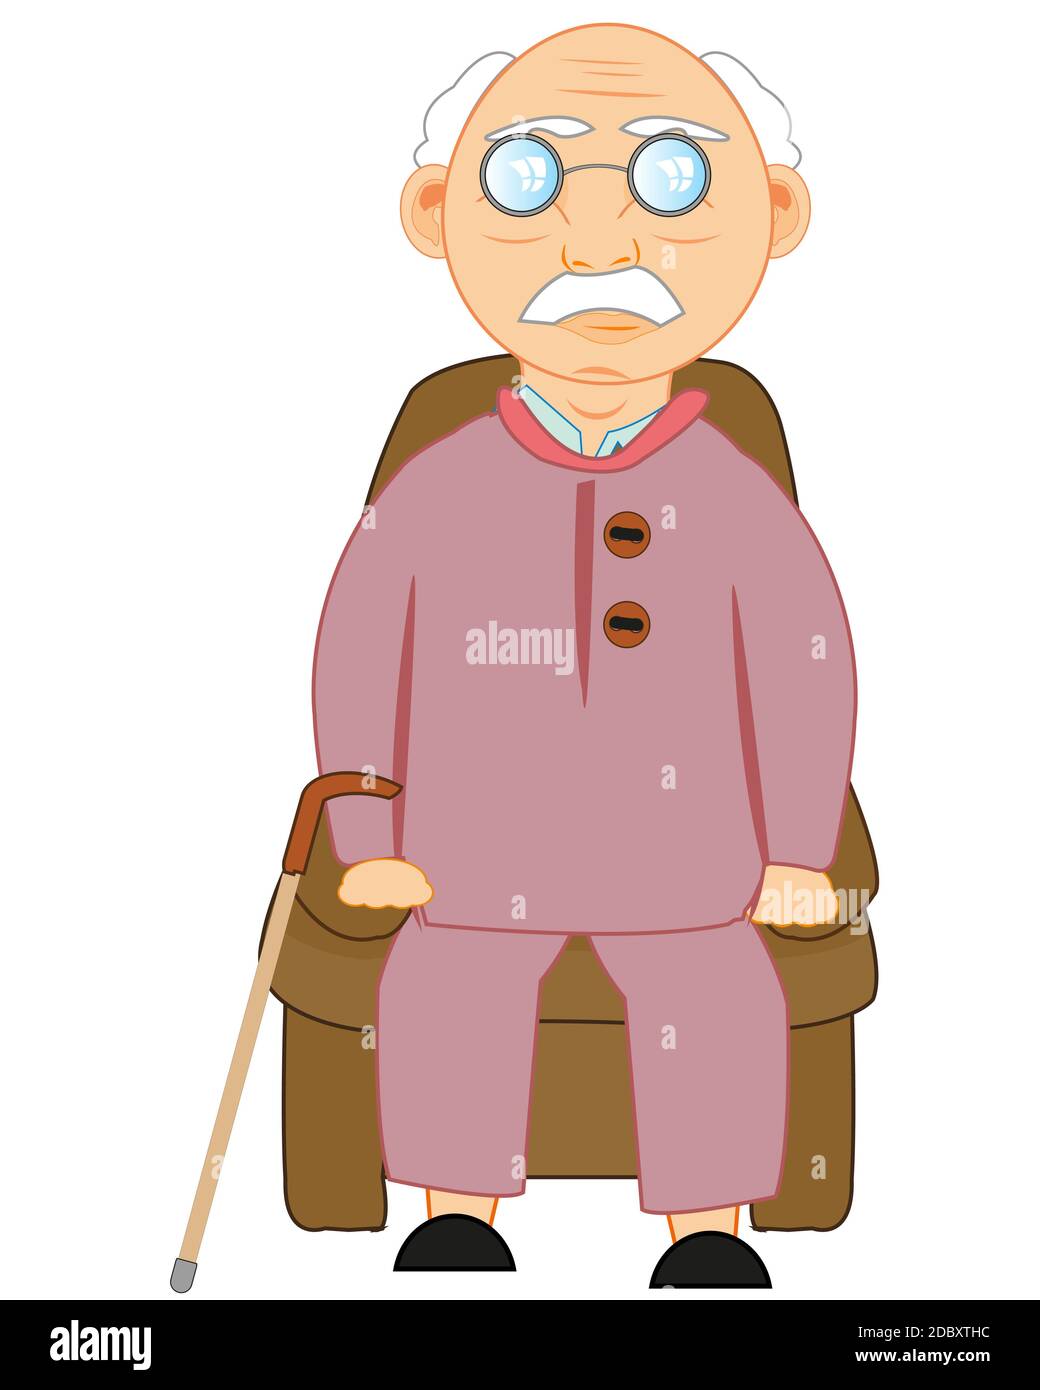 Vector illustration of the elderly person reposing in soft easy chair Stock Photo